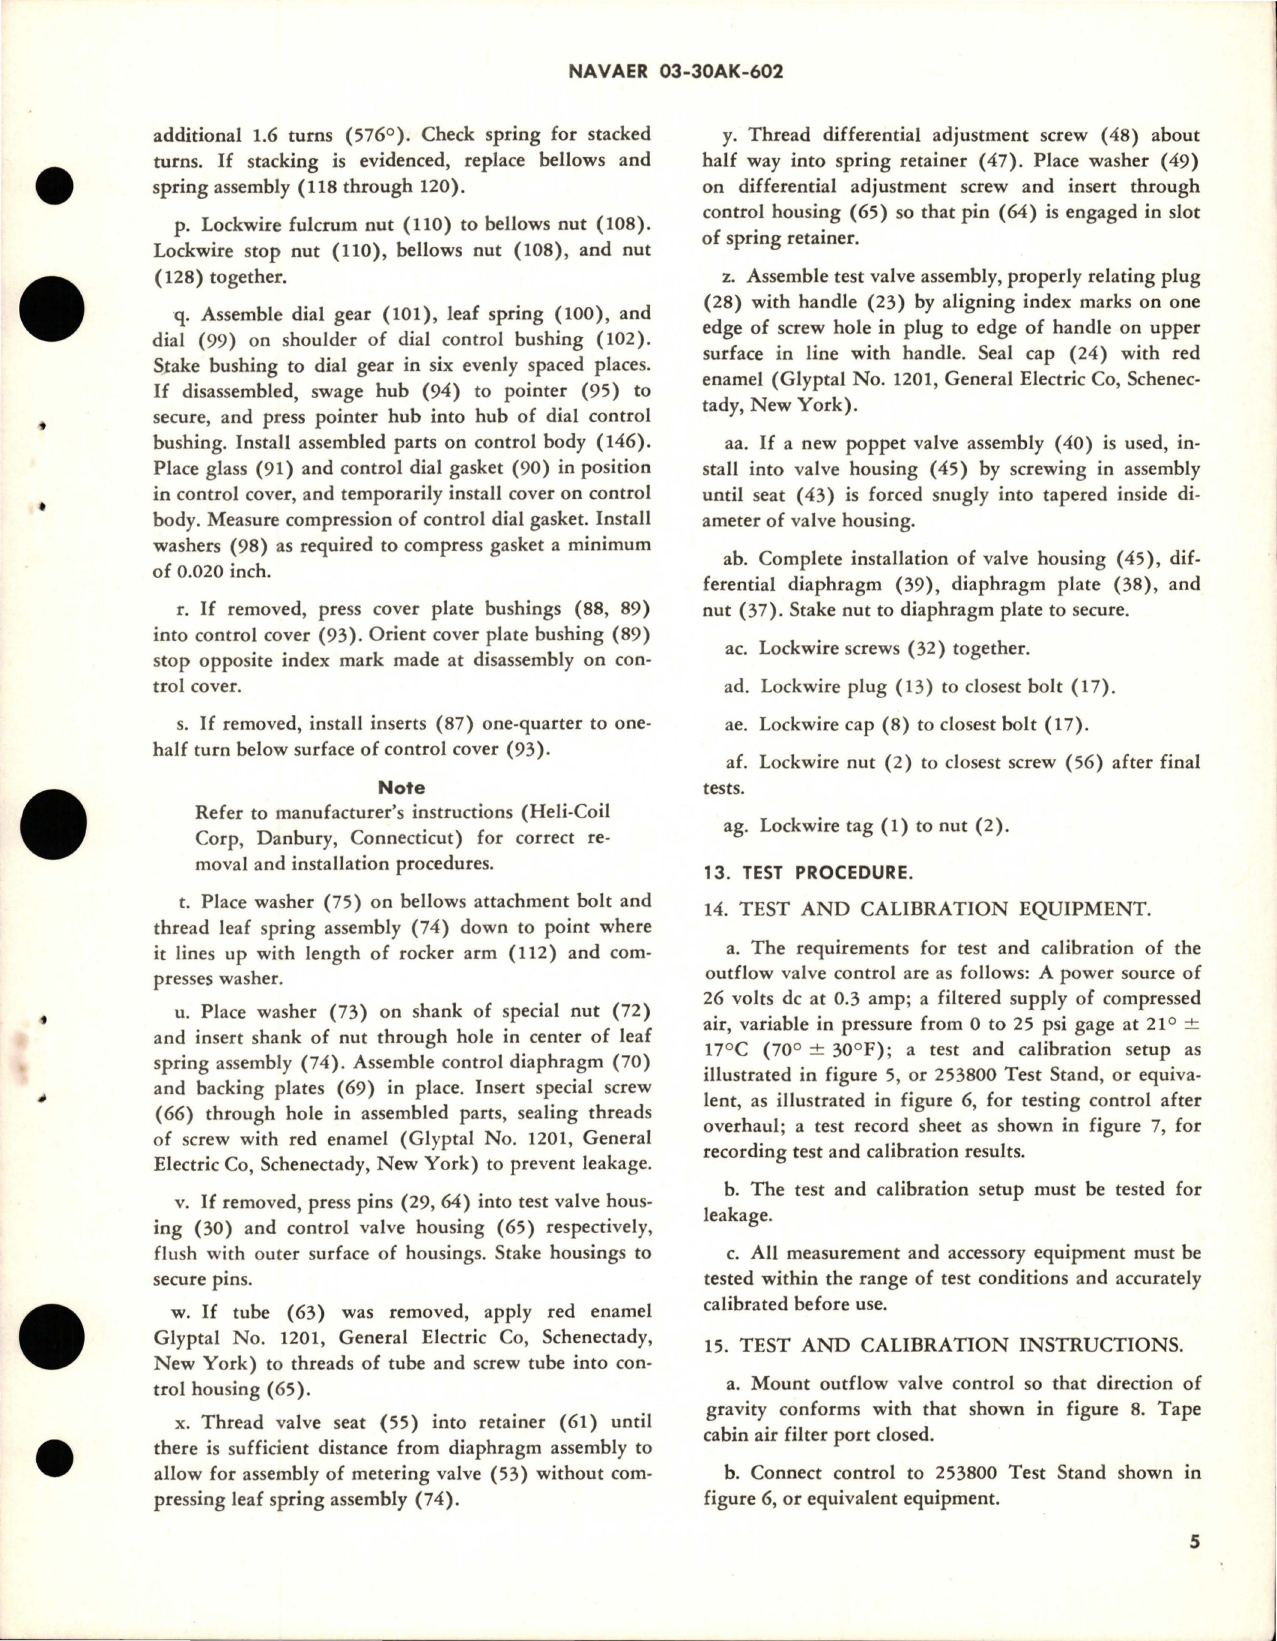 Sample page 5 from AirCorps Library document: Overhaul Instructions with Parts Breakdown for Cabin Air Pressure Outflow Valve - Part 102088-416 - Model OVC3-14-1 